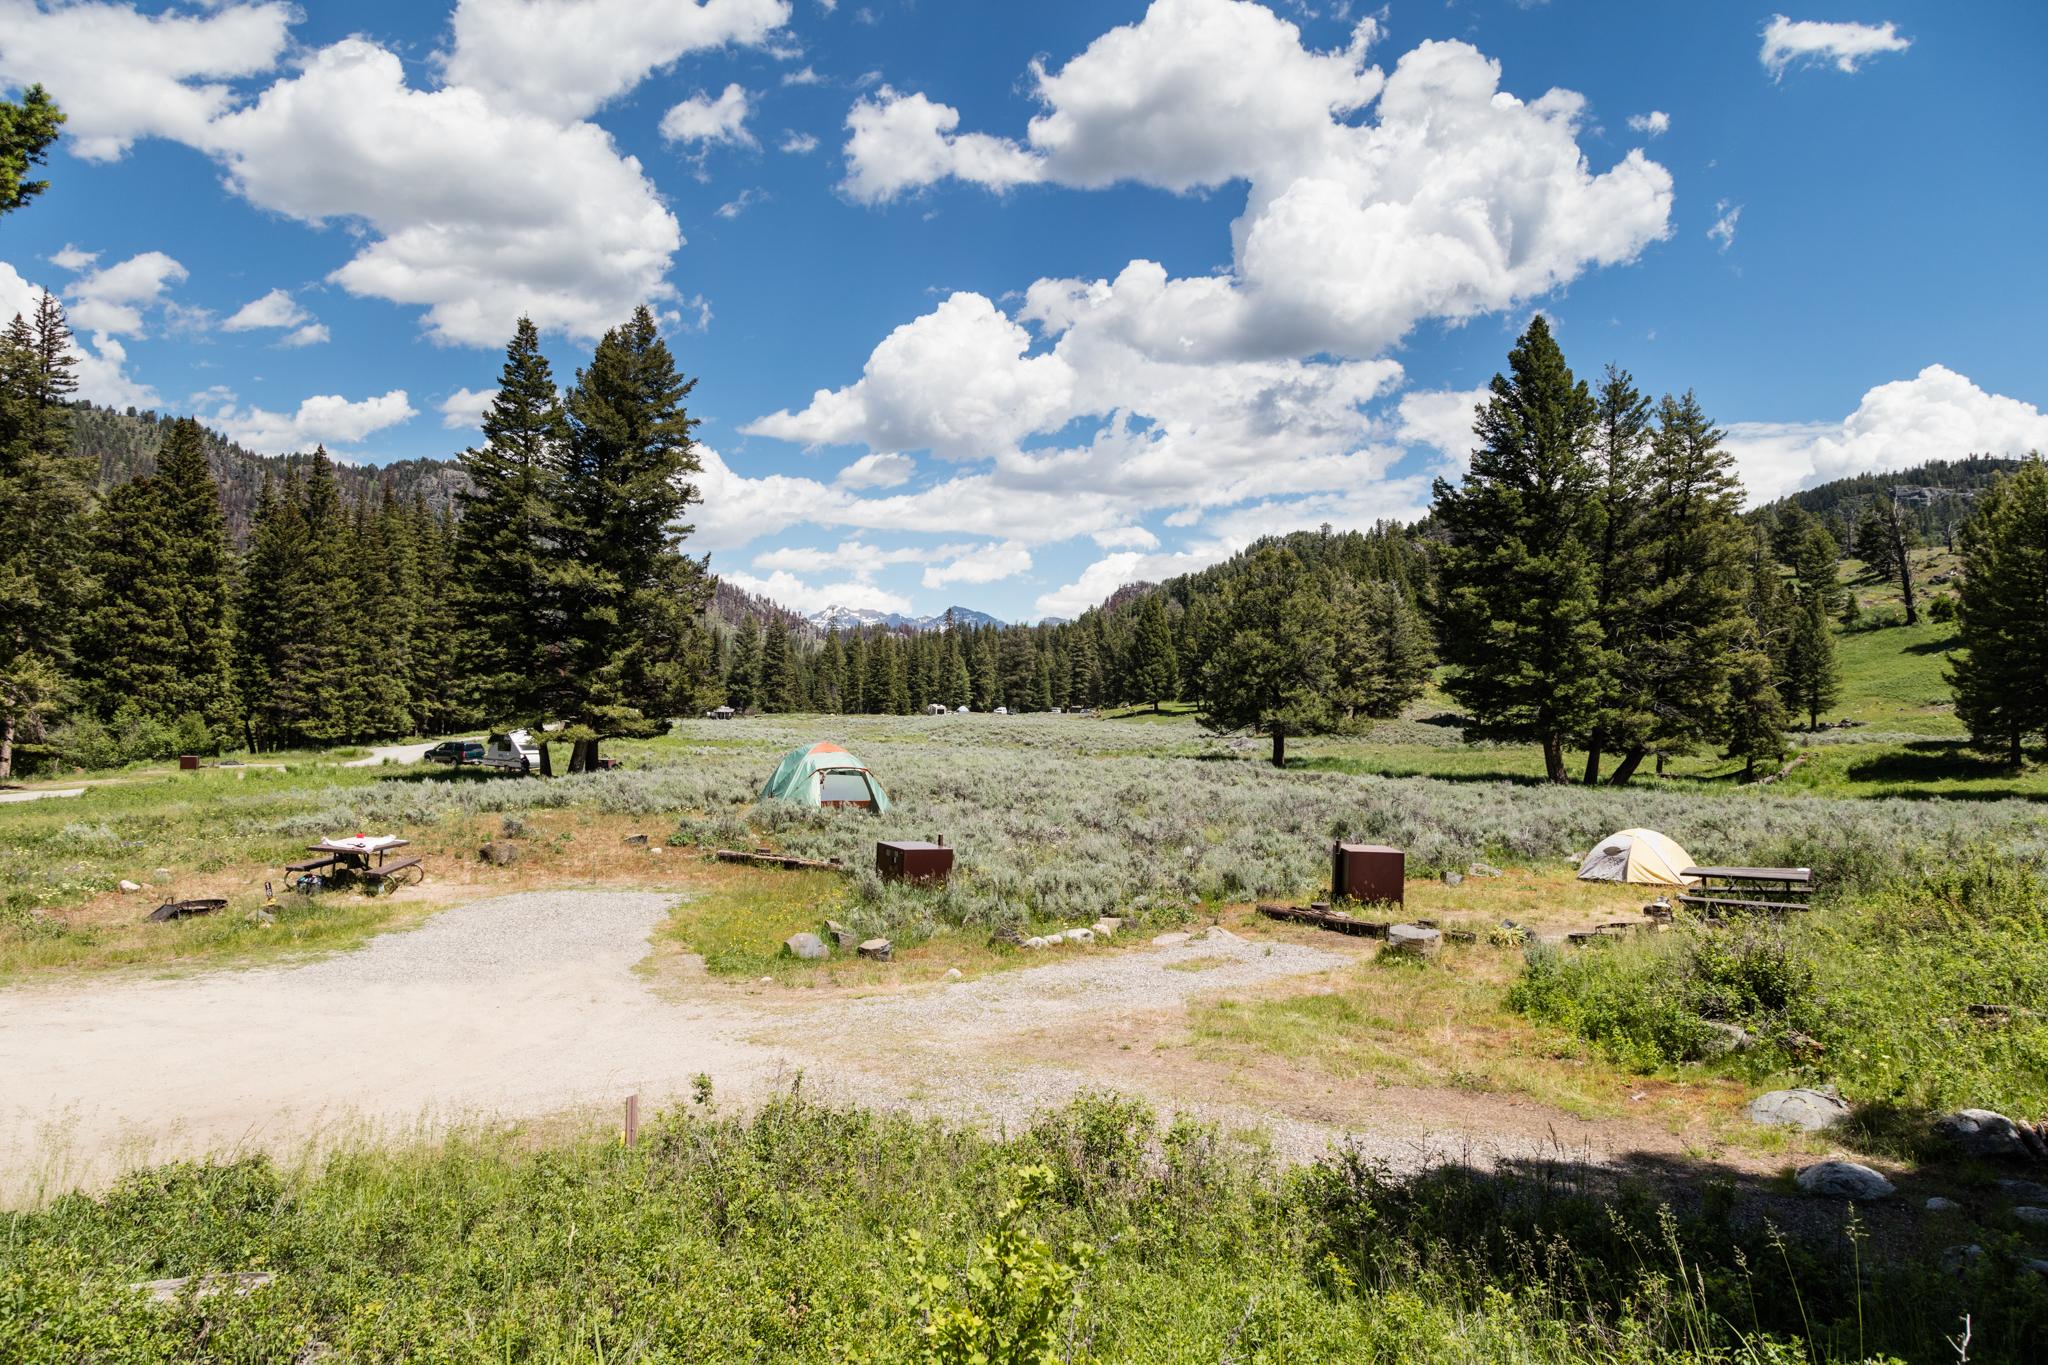 Campsites in the Slough Creek Campground